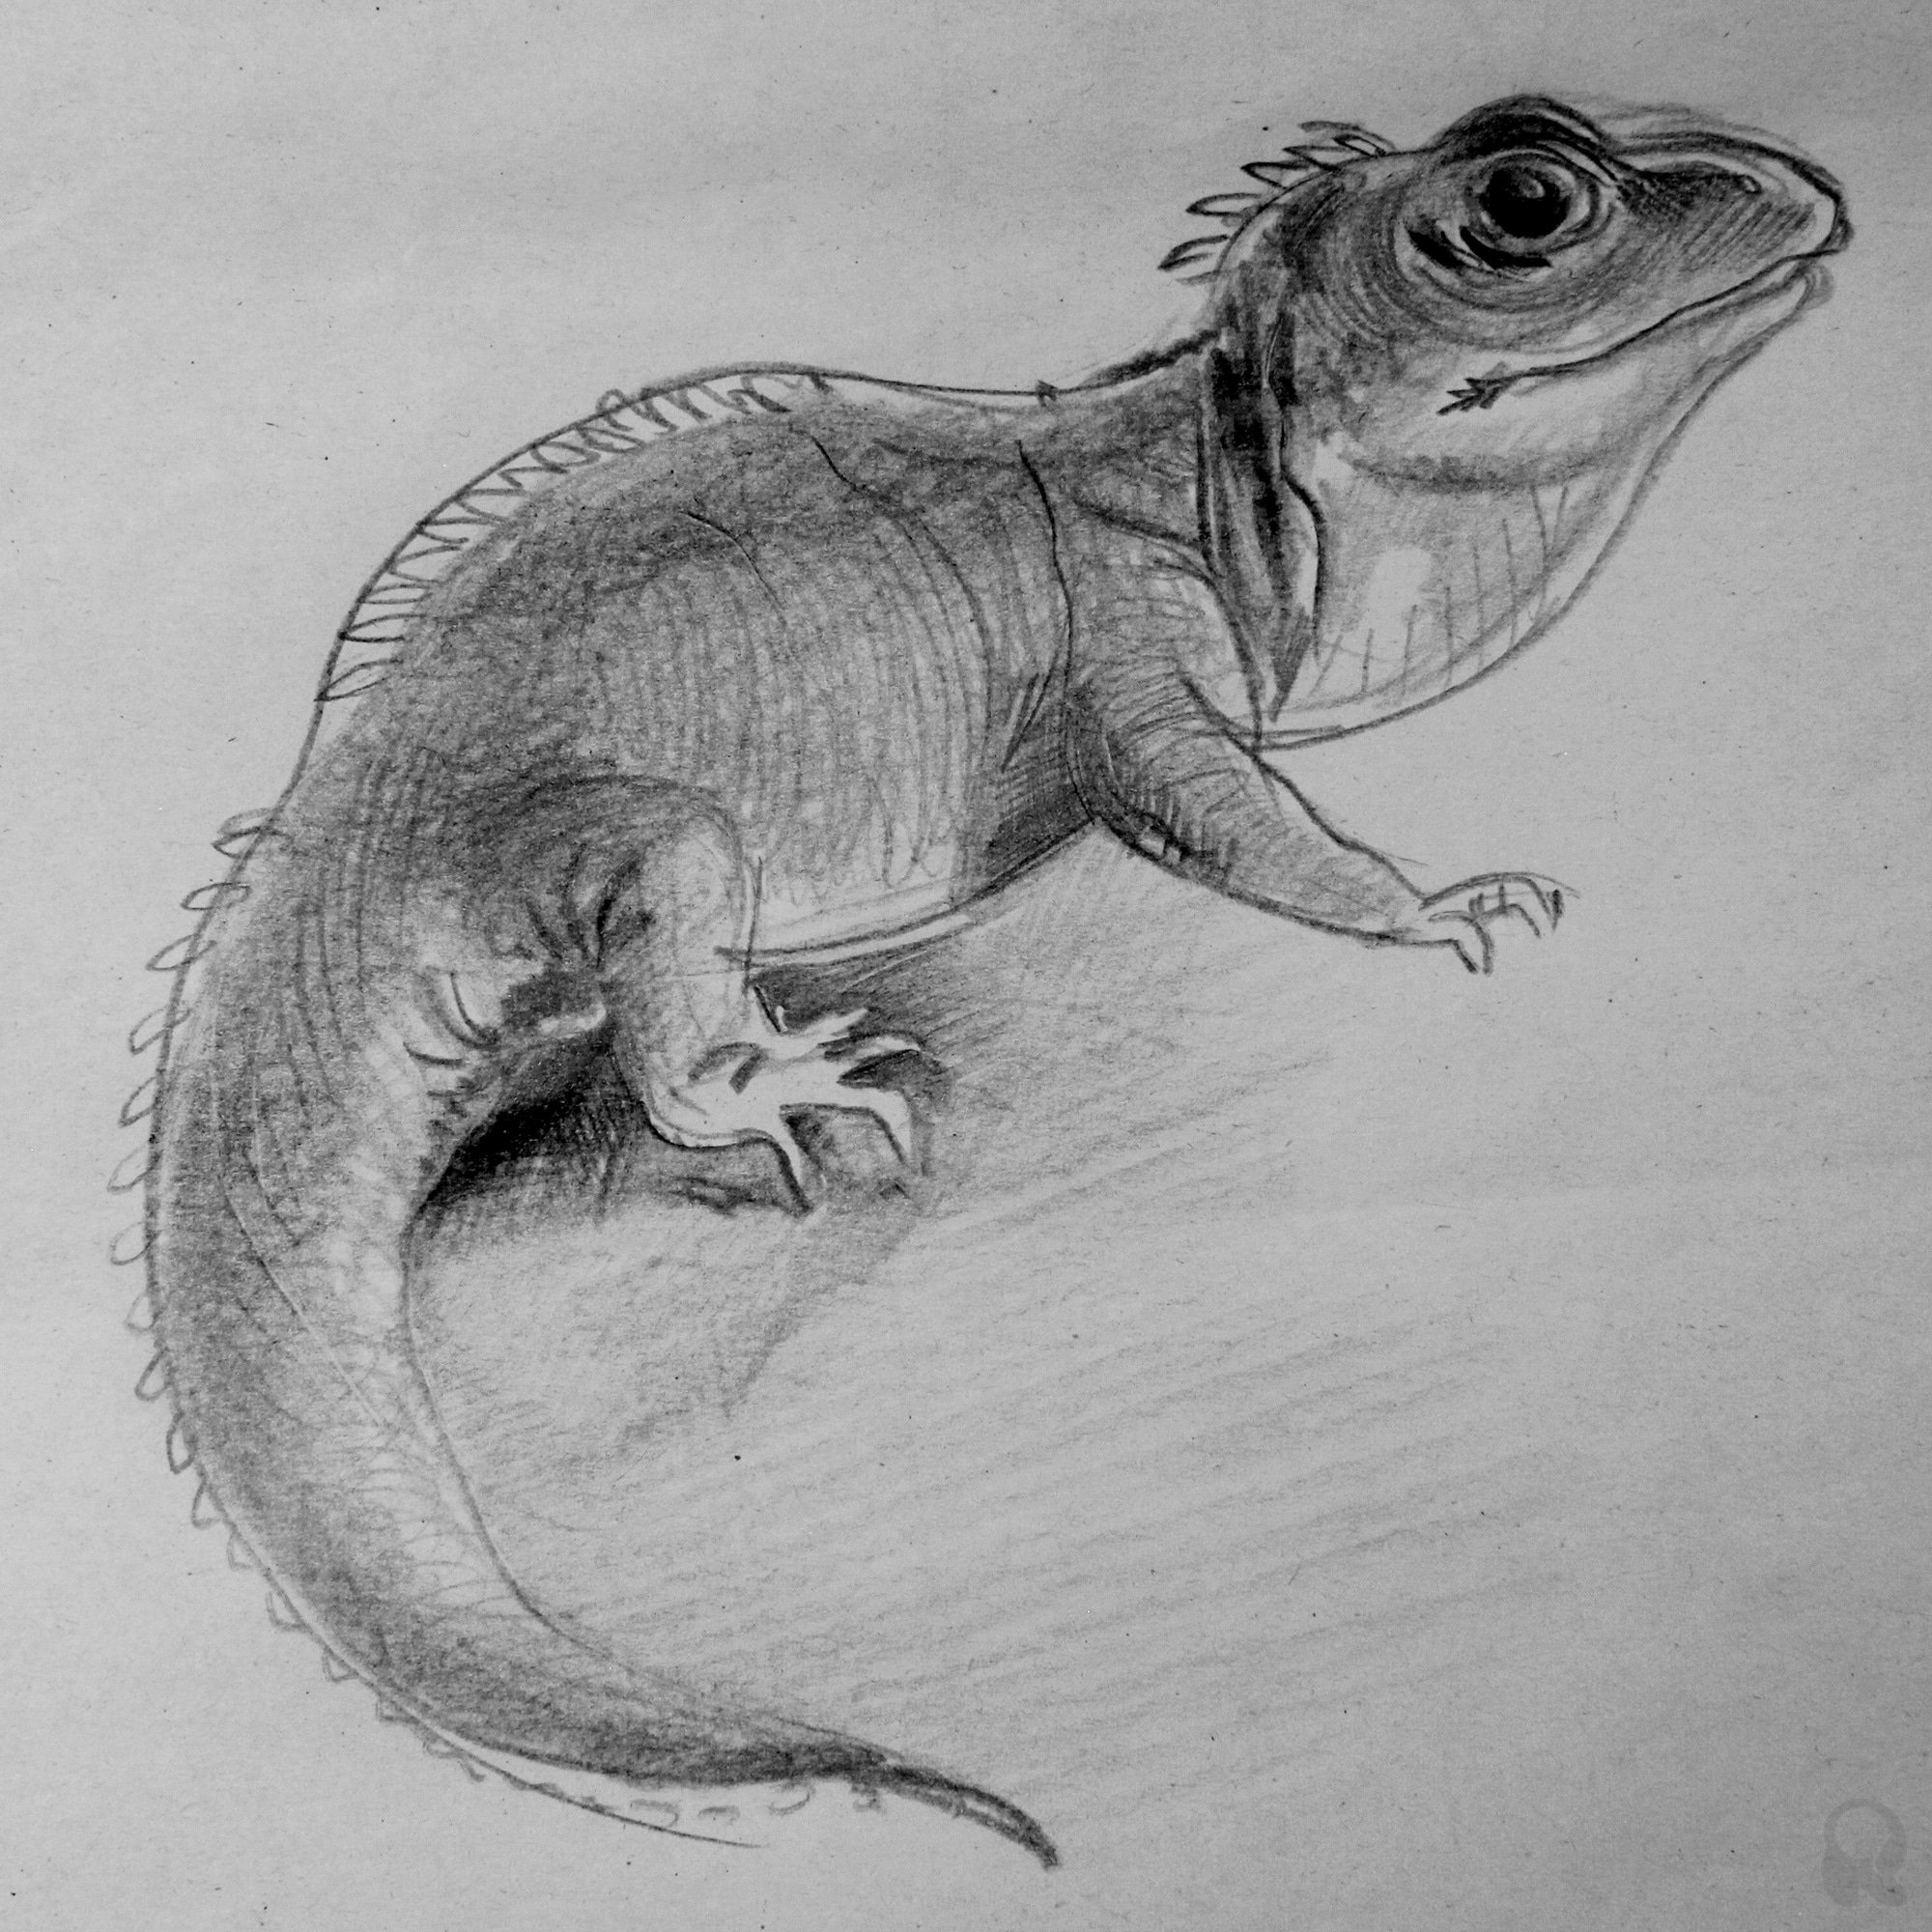 Some reptile sketches by me – Artist Puspendu